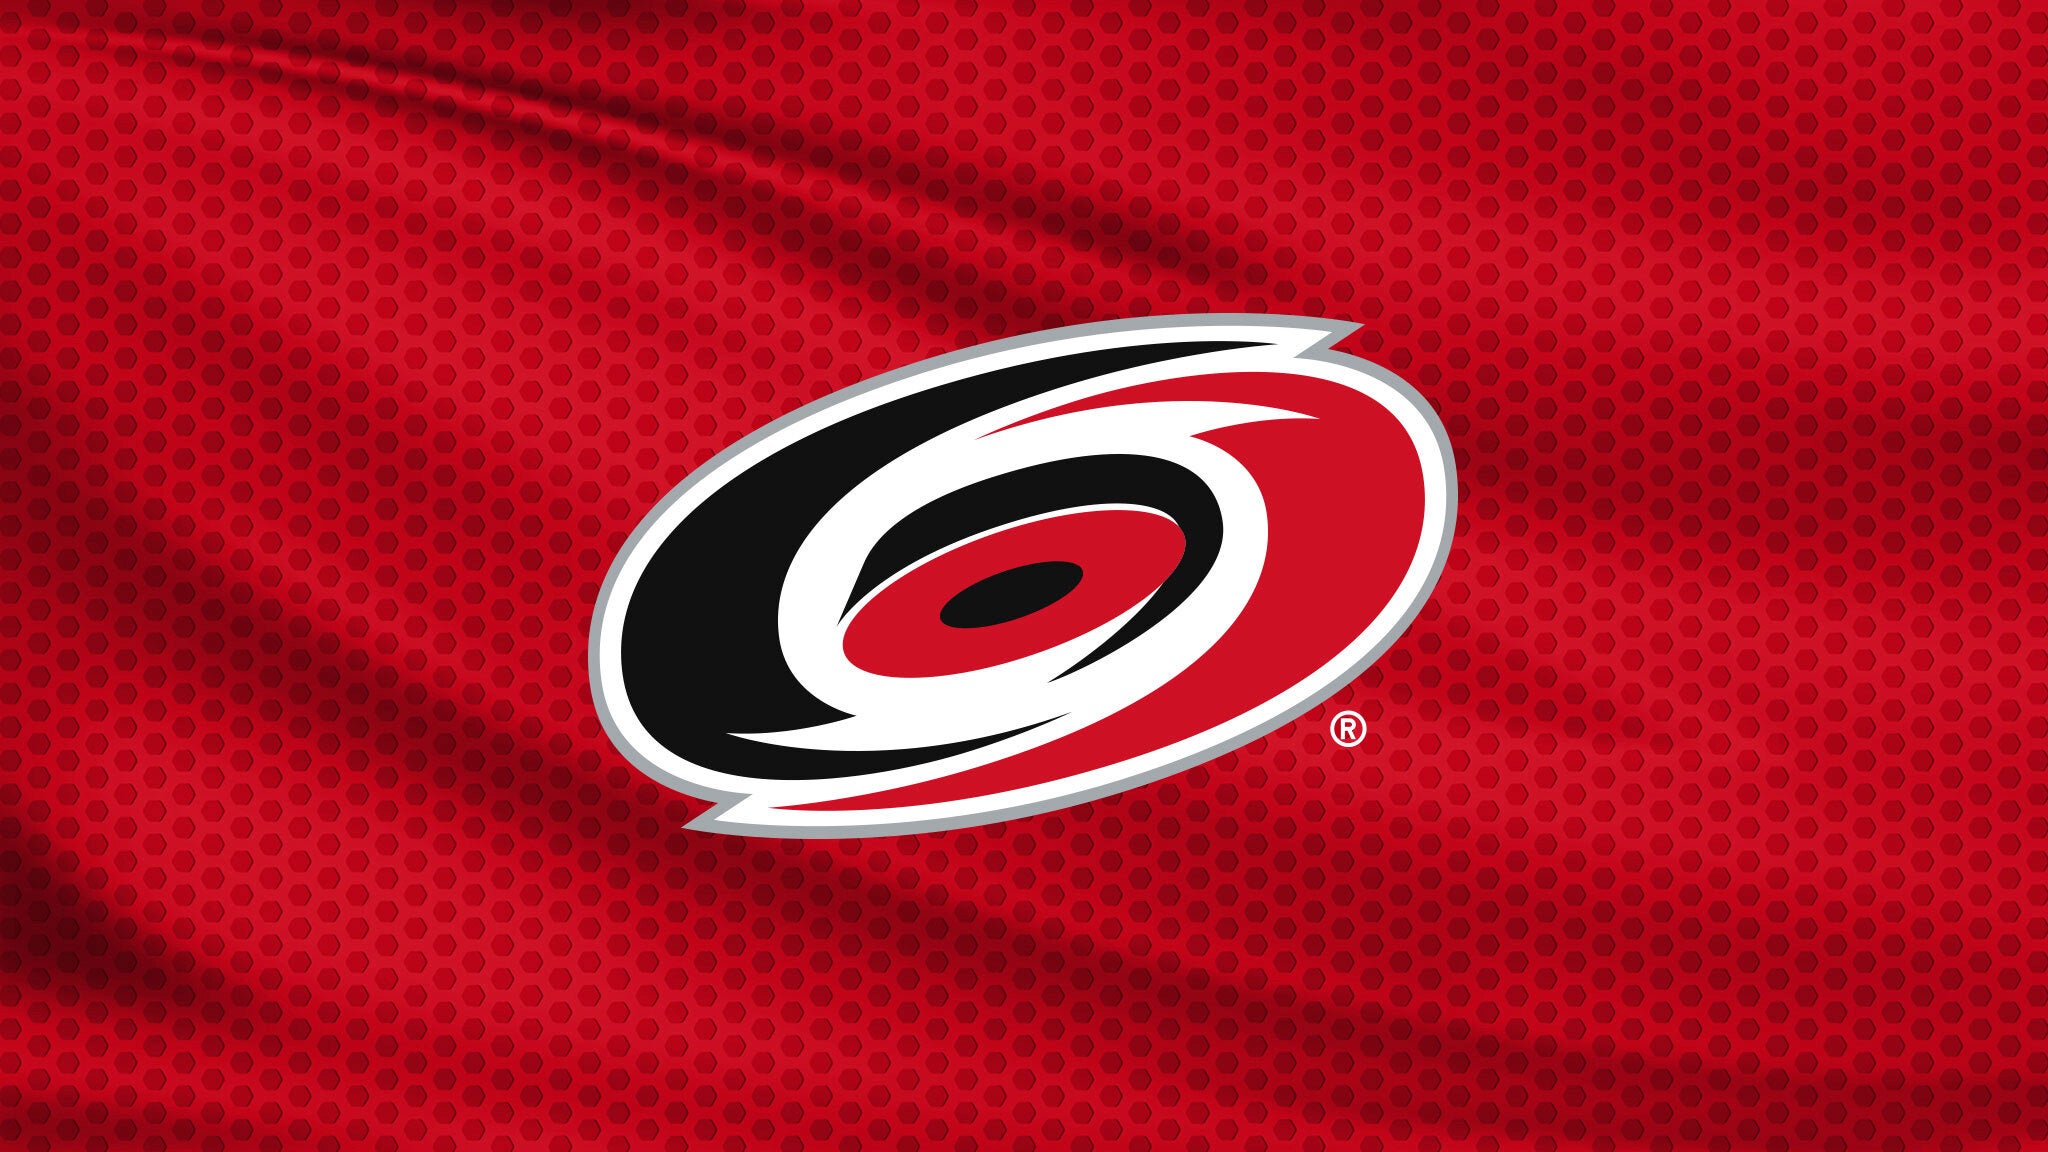 Carolina Hurricanes vs. Pittsburgh Penguins in Raleigh promo photo for Standing Room Only Ticket presale offer code